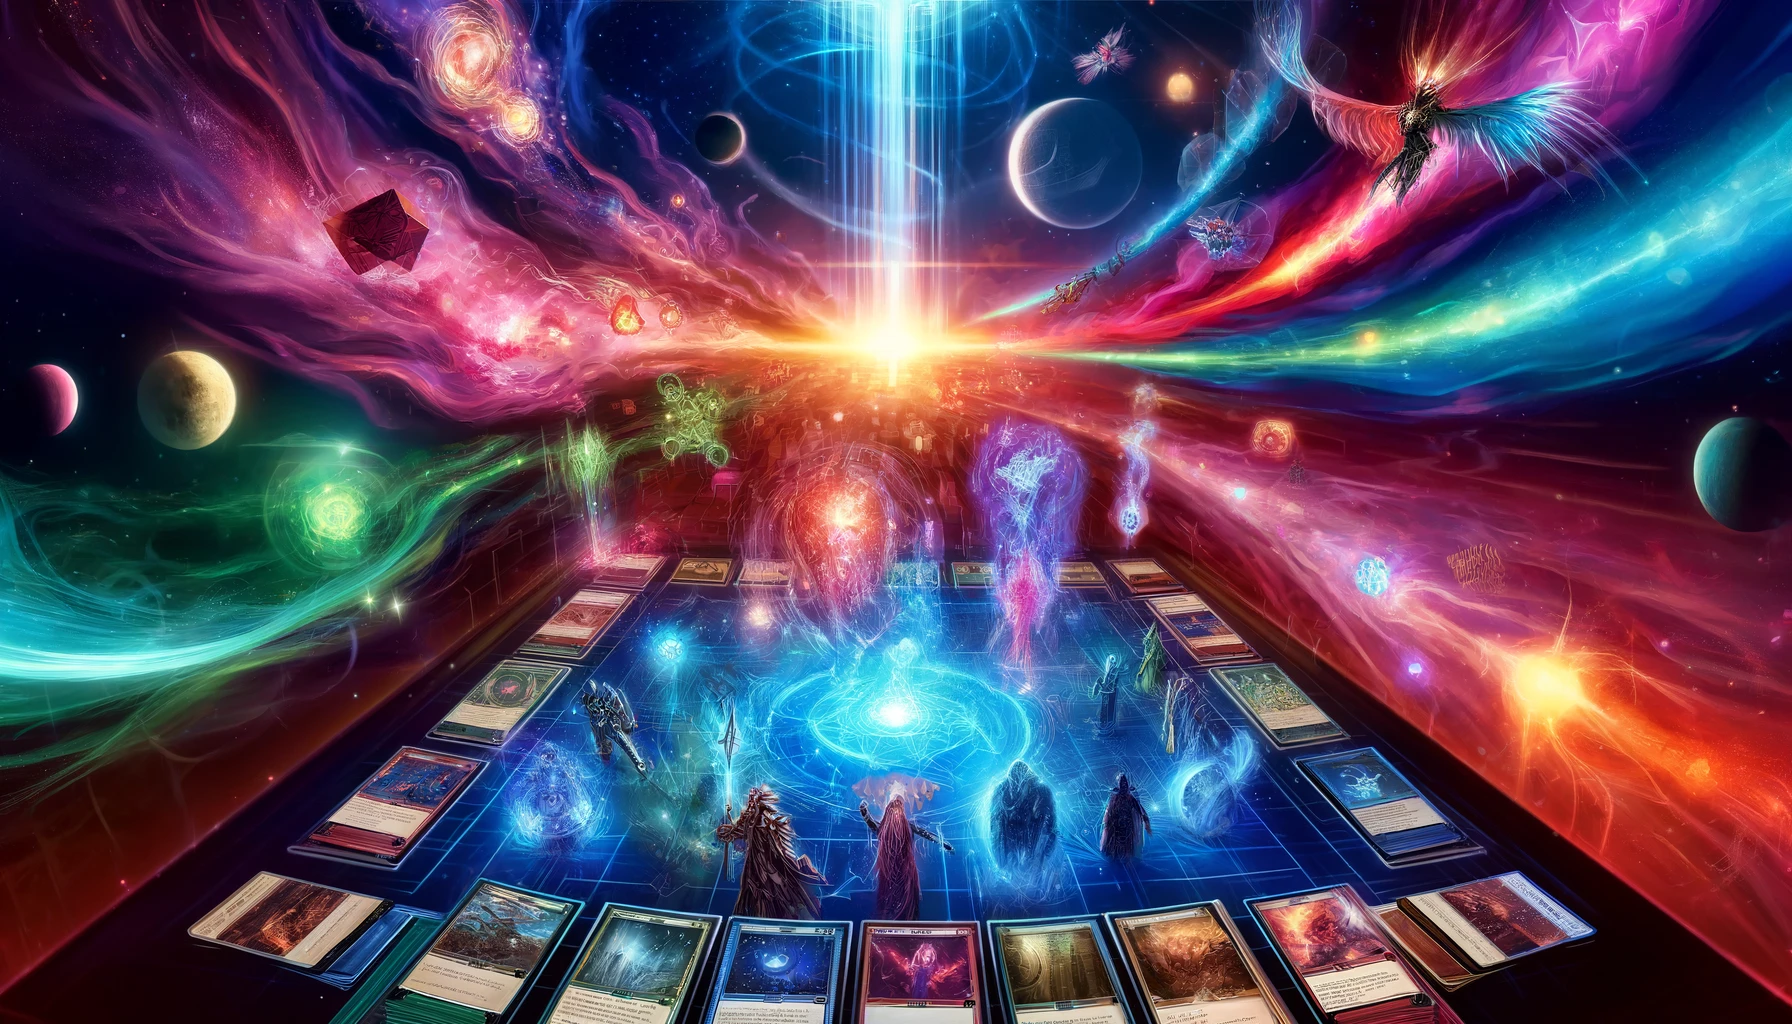 A vivid depiction of a cosmic battleground at Panoptichron, featuring diverse Marvel Snap cards engaged in a dynamic battle with mystical energy flows.